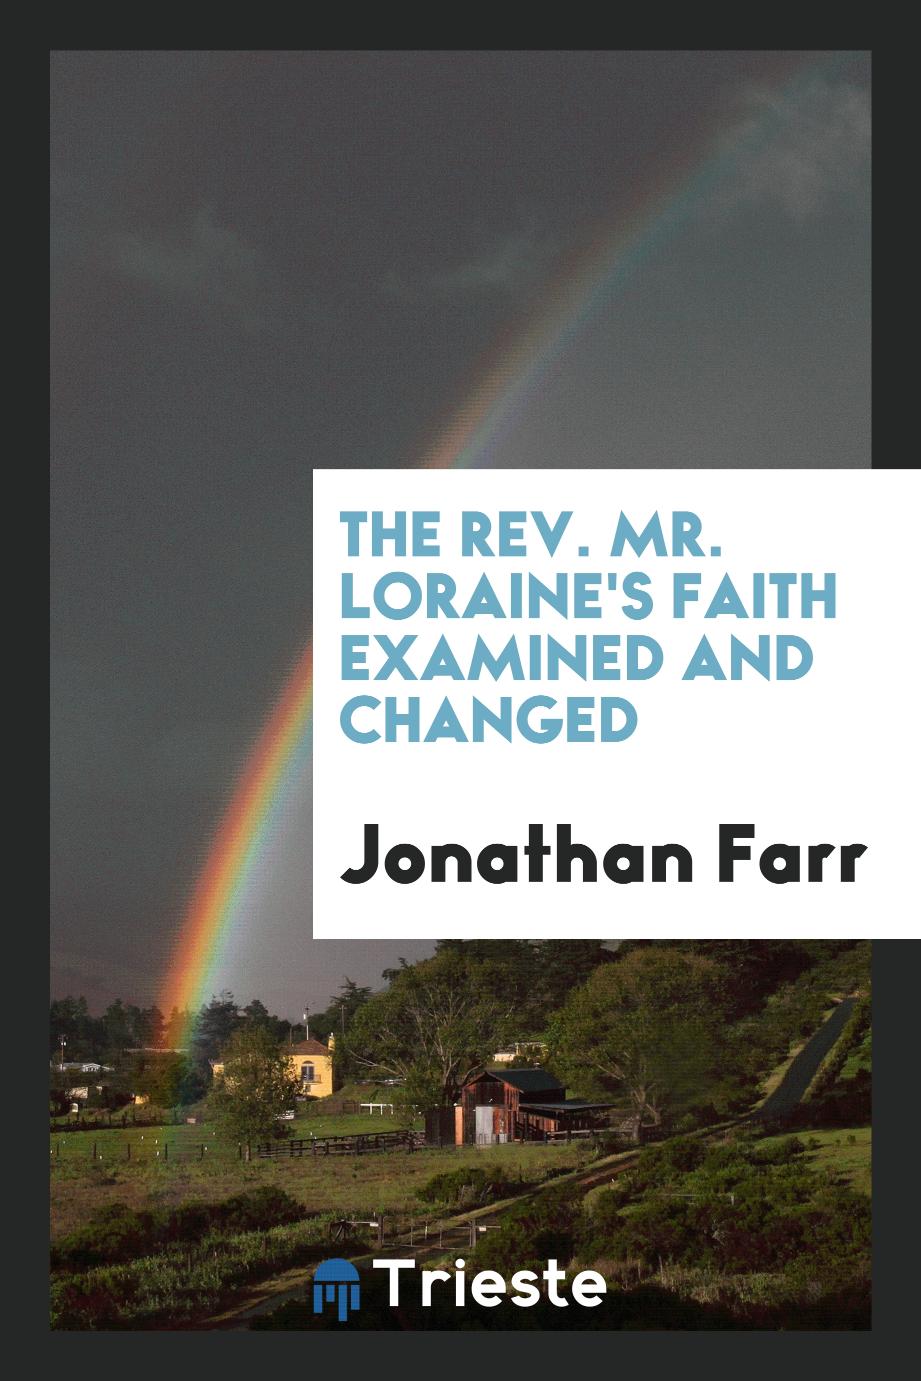 The Rev. Mr. Loraine's Faith Examined and Changed